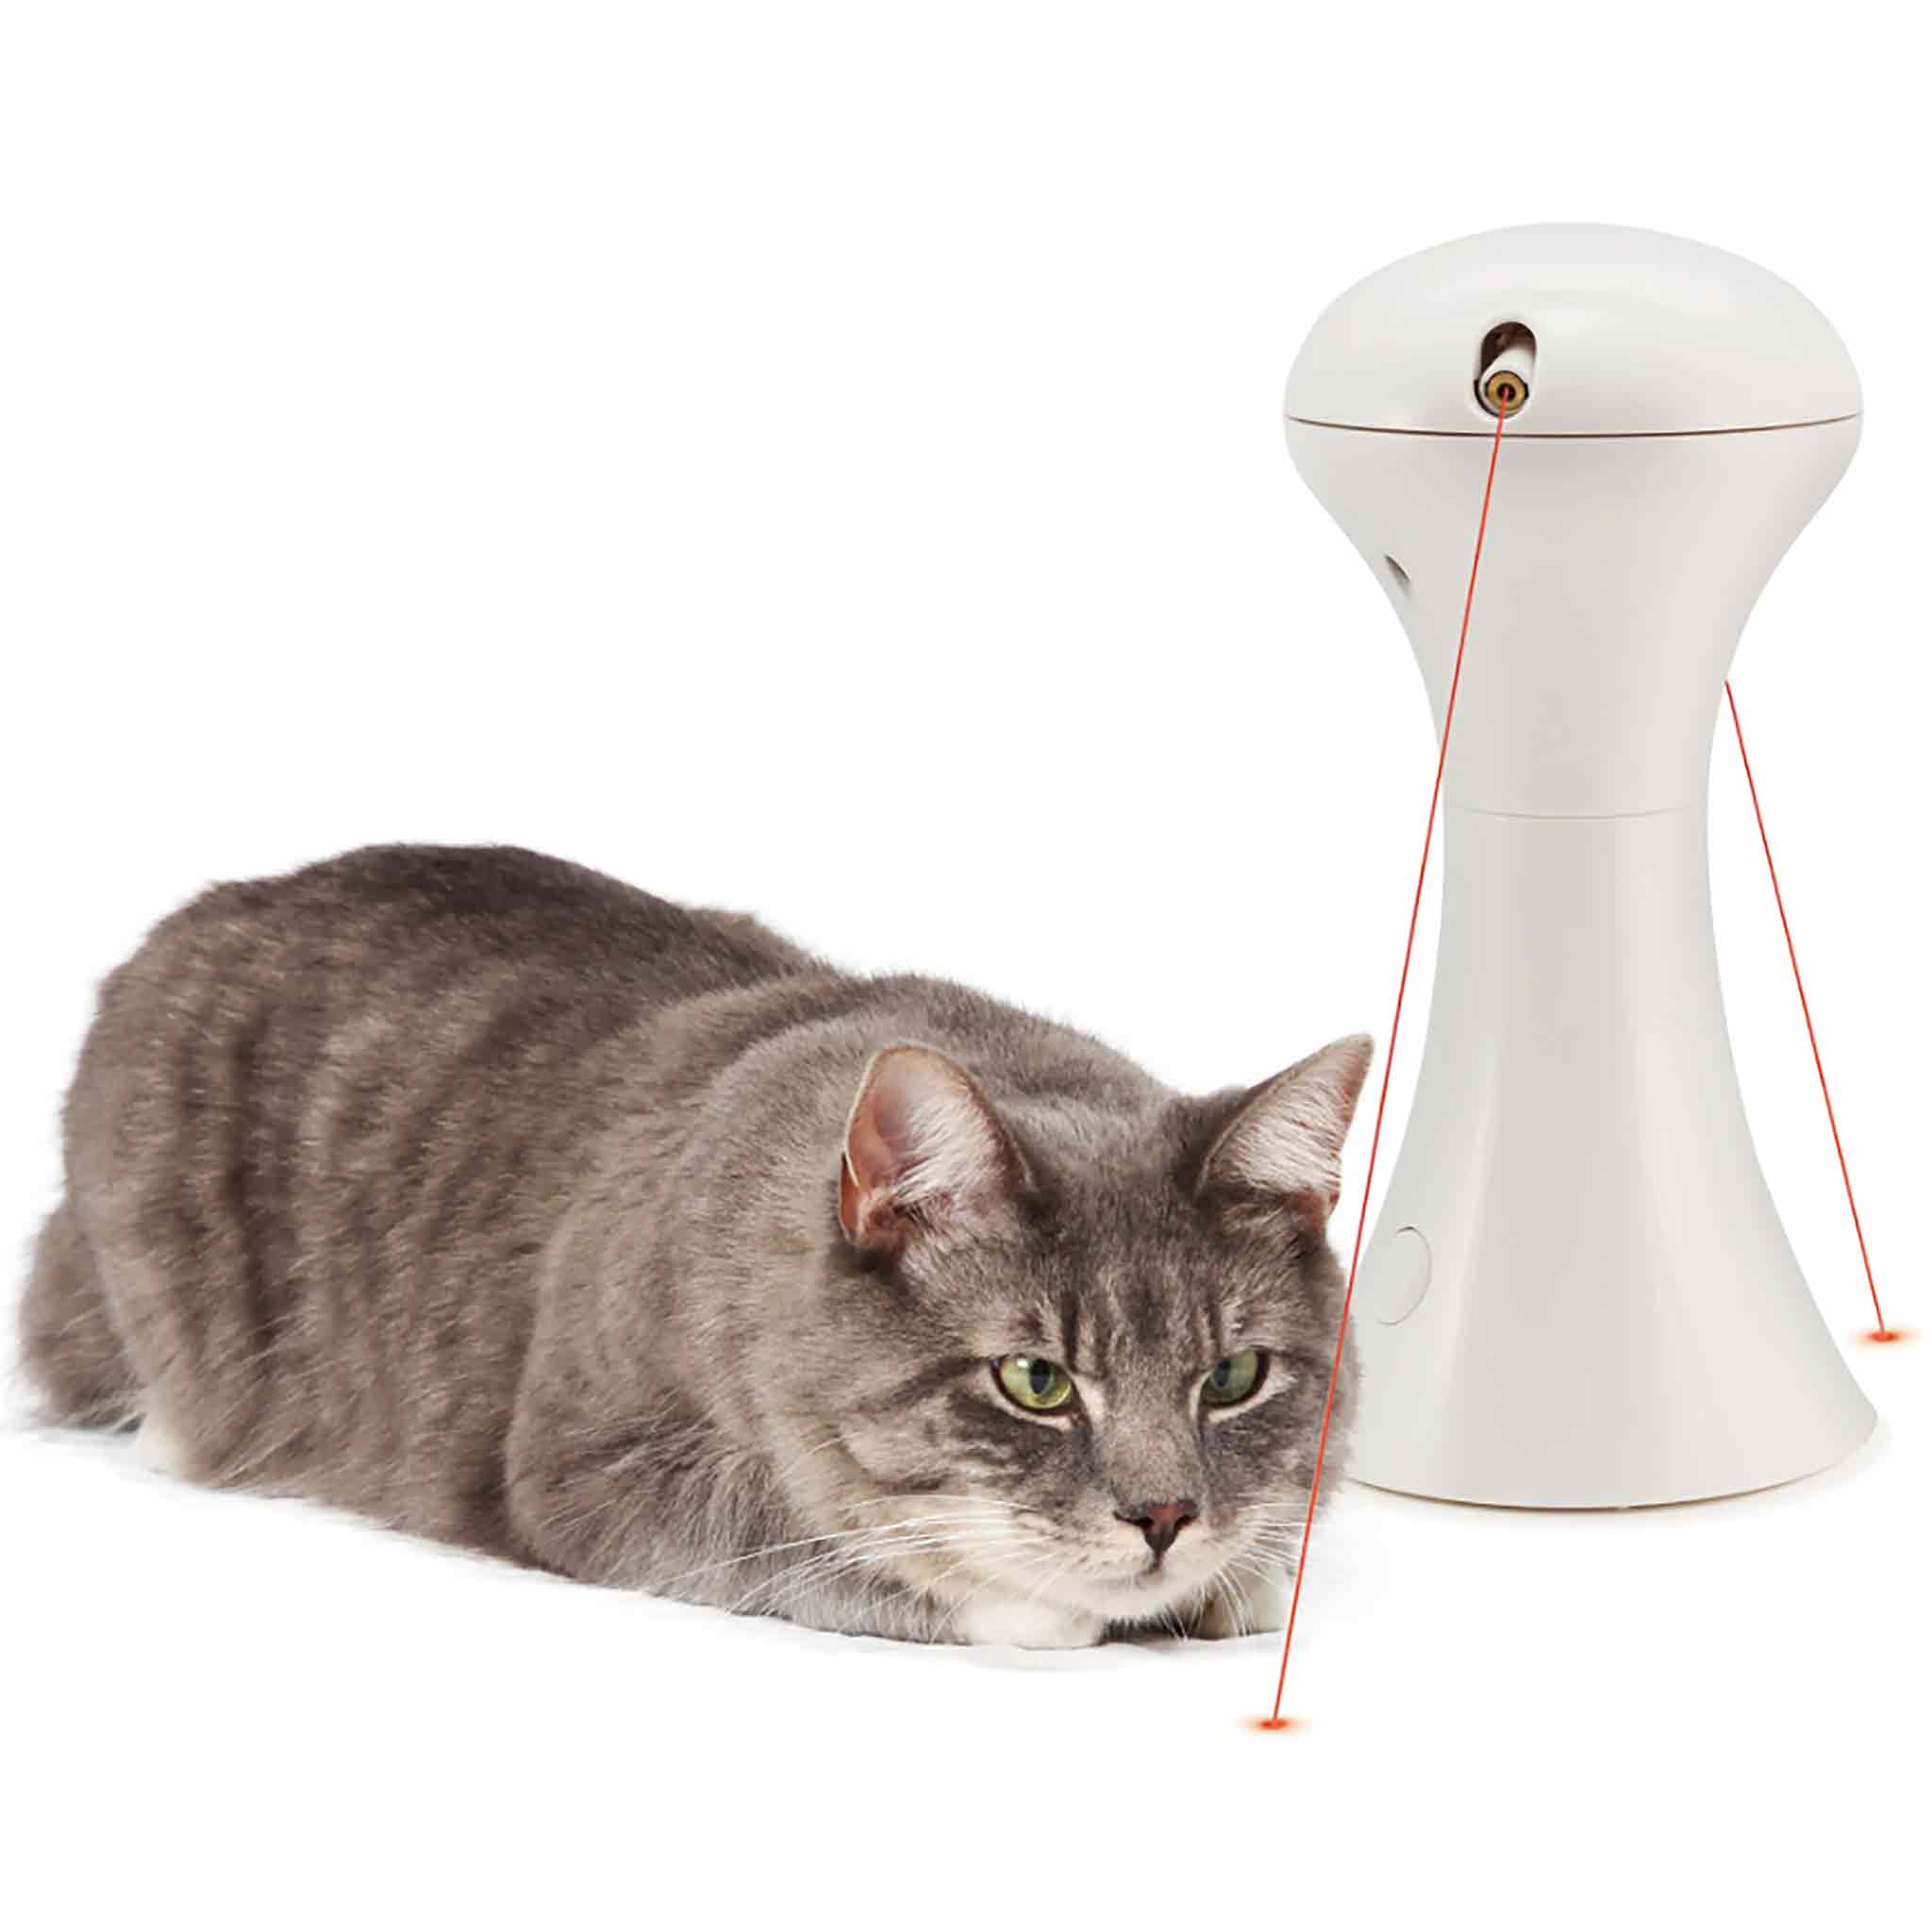 Samm battery powered toy that shines laser lights for cats to chase. Hours of fun and great to watch.